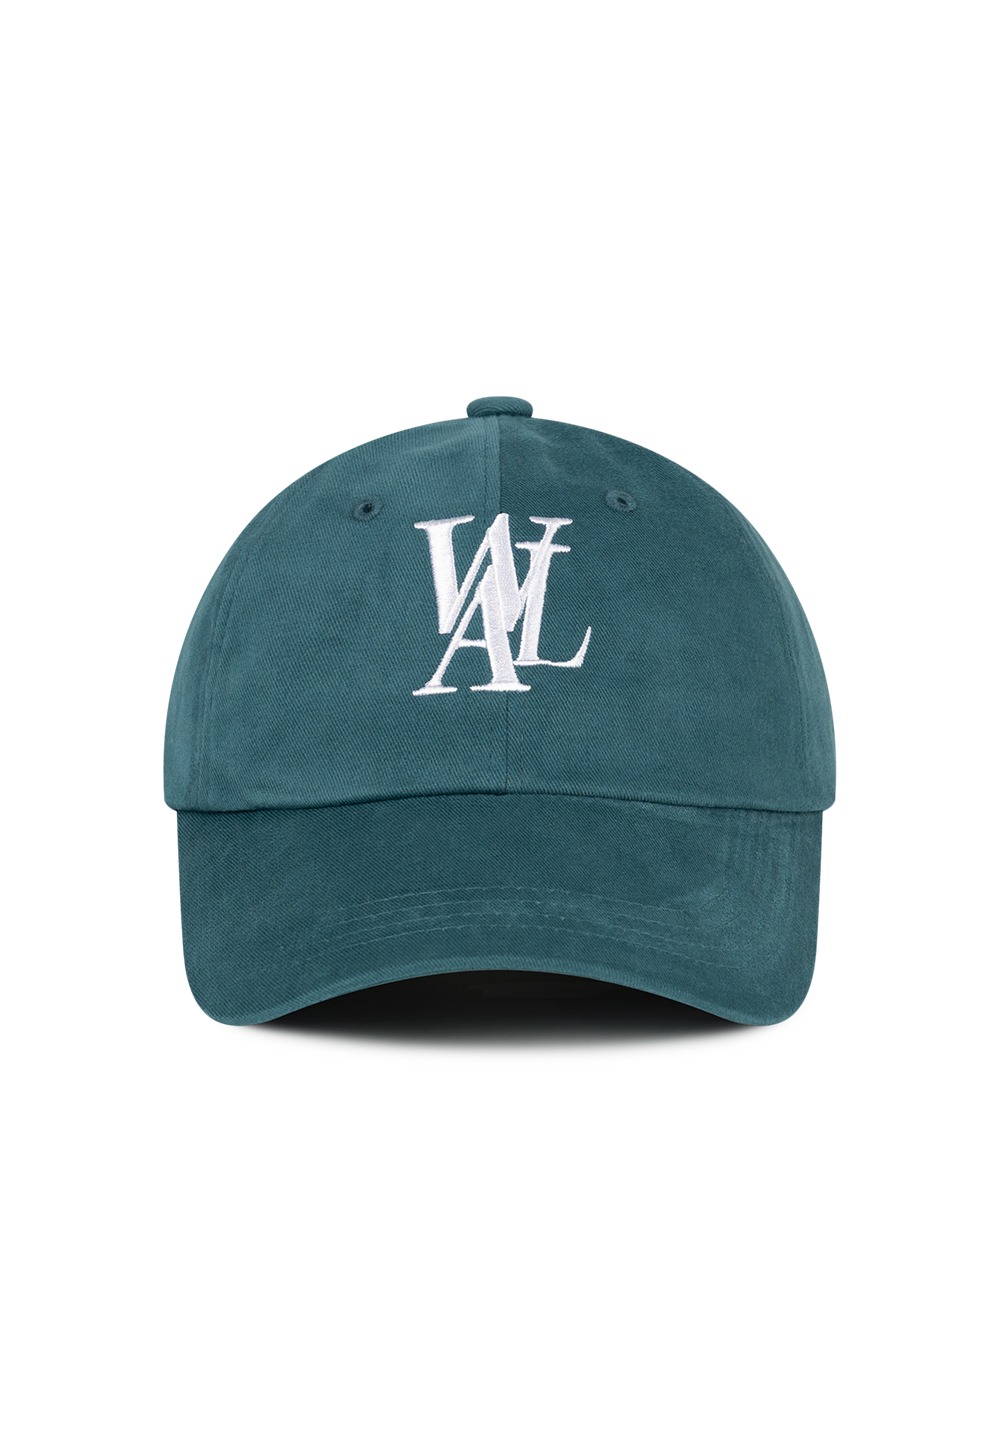 Signature low ball cap - FOREST GREEN